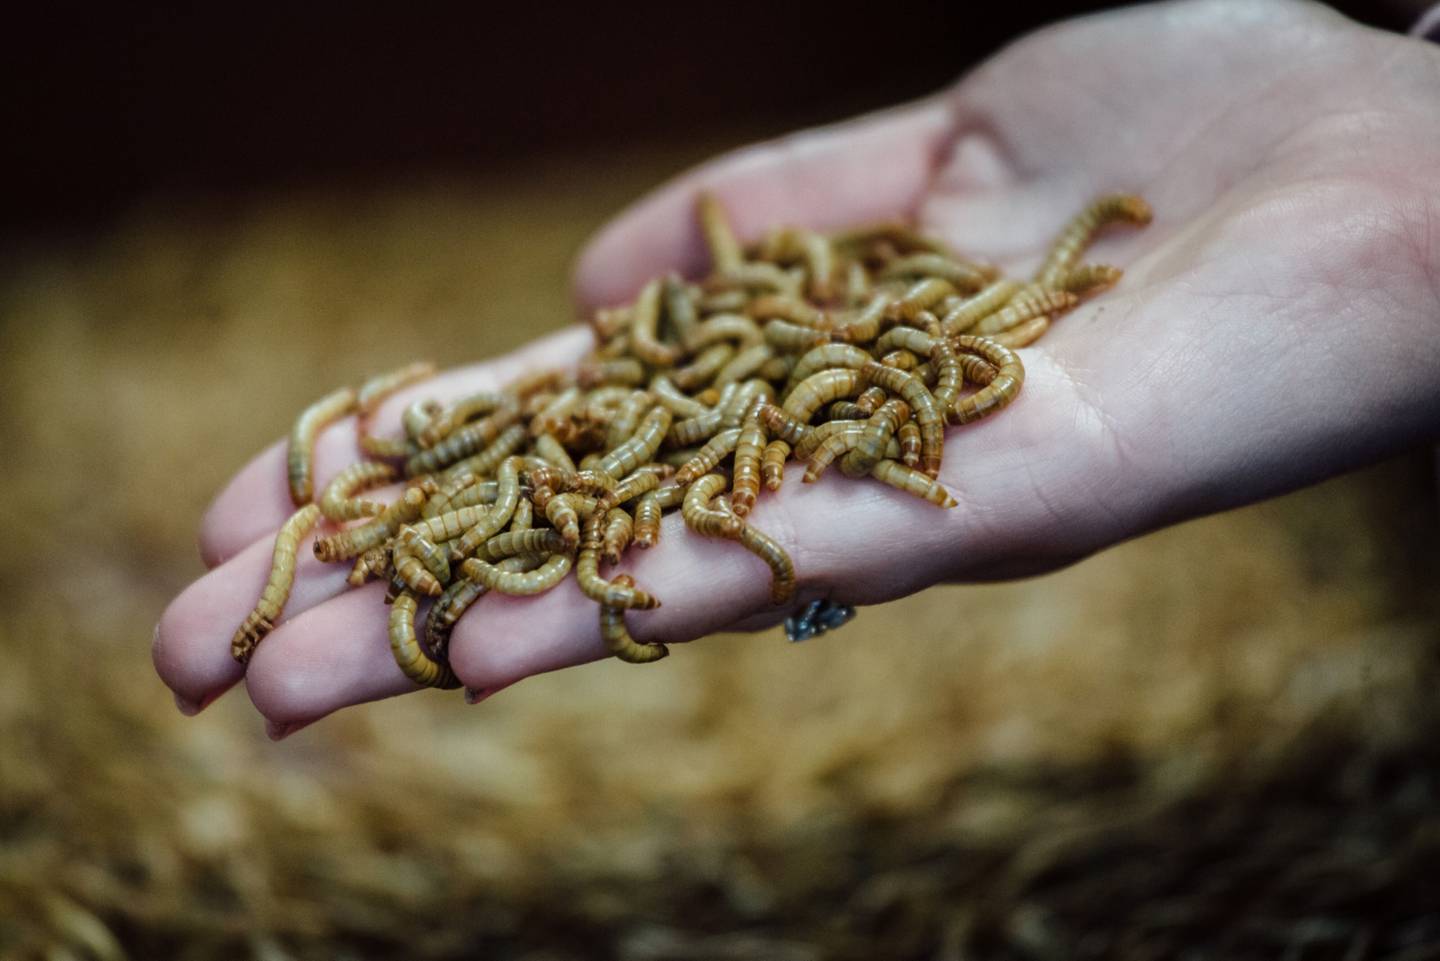 An employee holds mealworms, also known as Tenebrio molitor, inside the Ynsect insect farm in Dole, France.